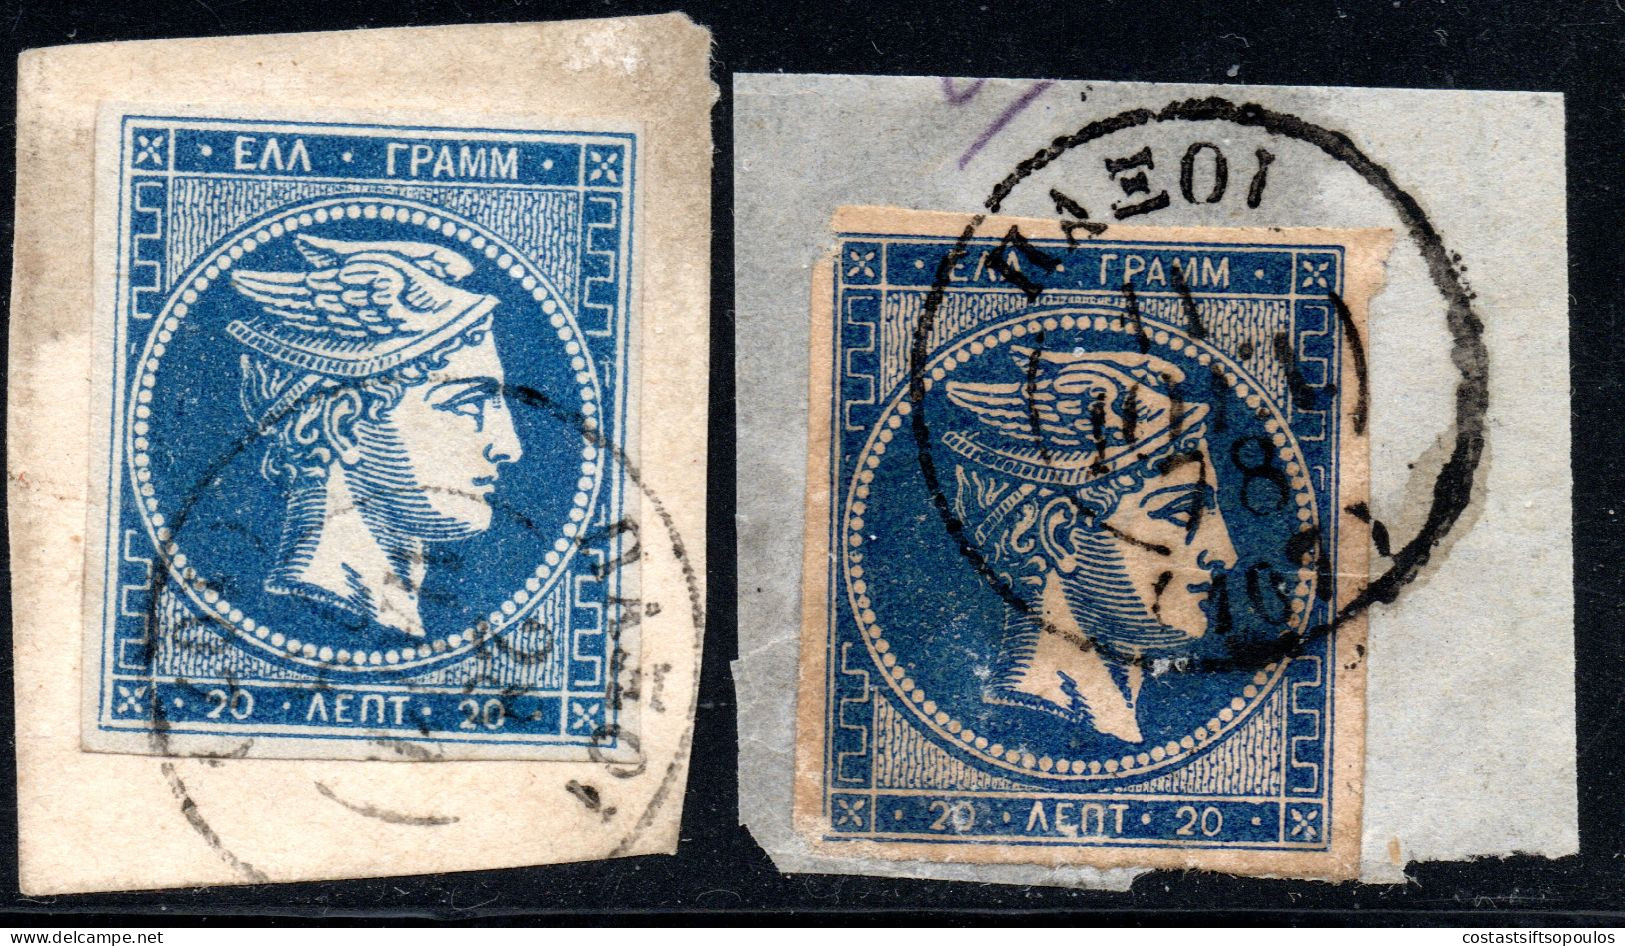 2503. GREECE 20 L. LARGE HERMES HEAD 107 PAXI, PAXOI POSTMARKS - Used Stamps